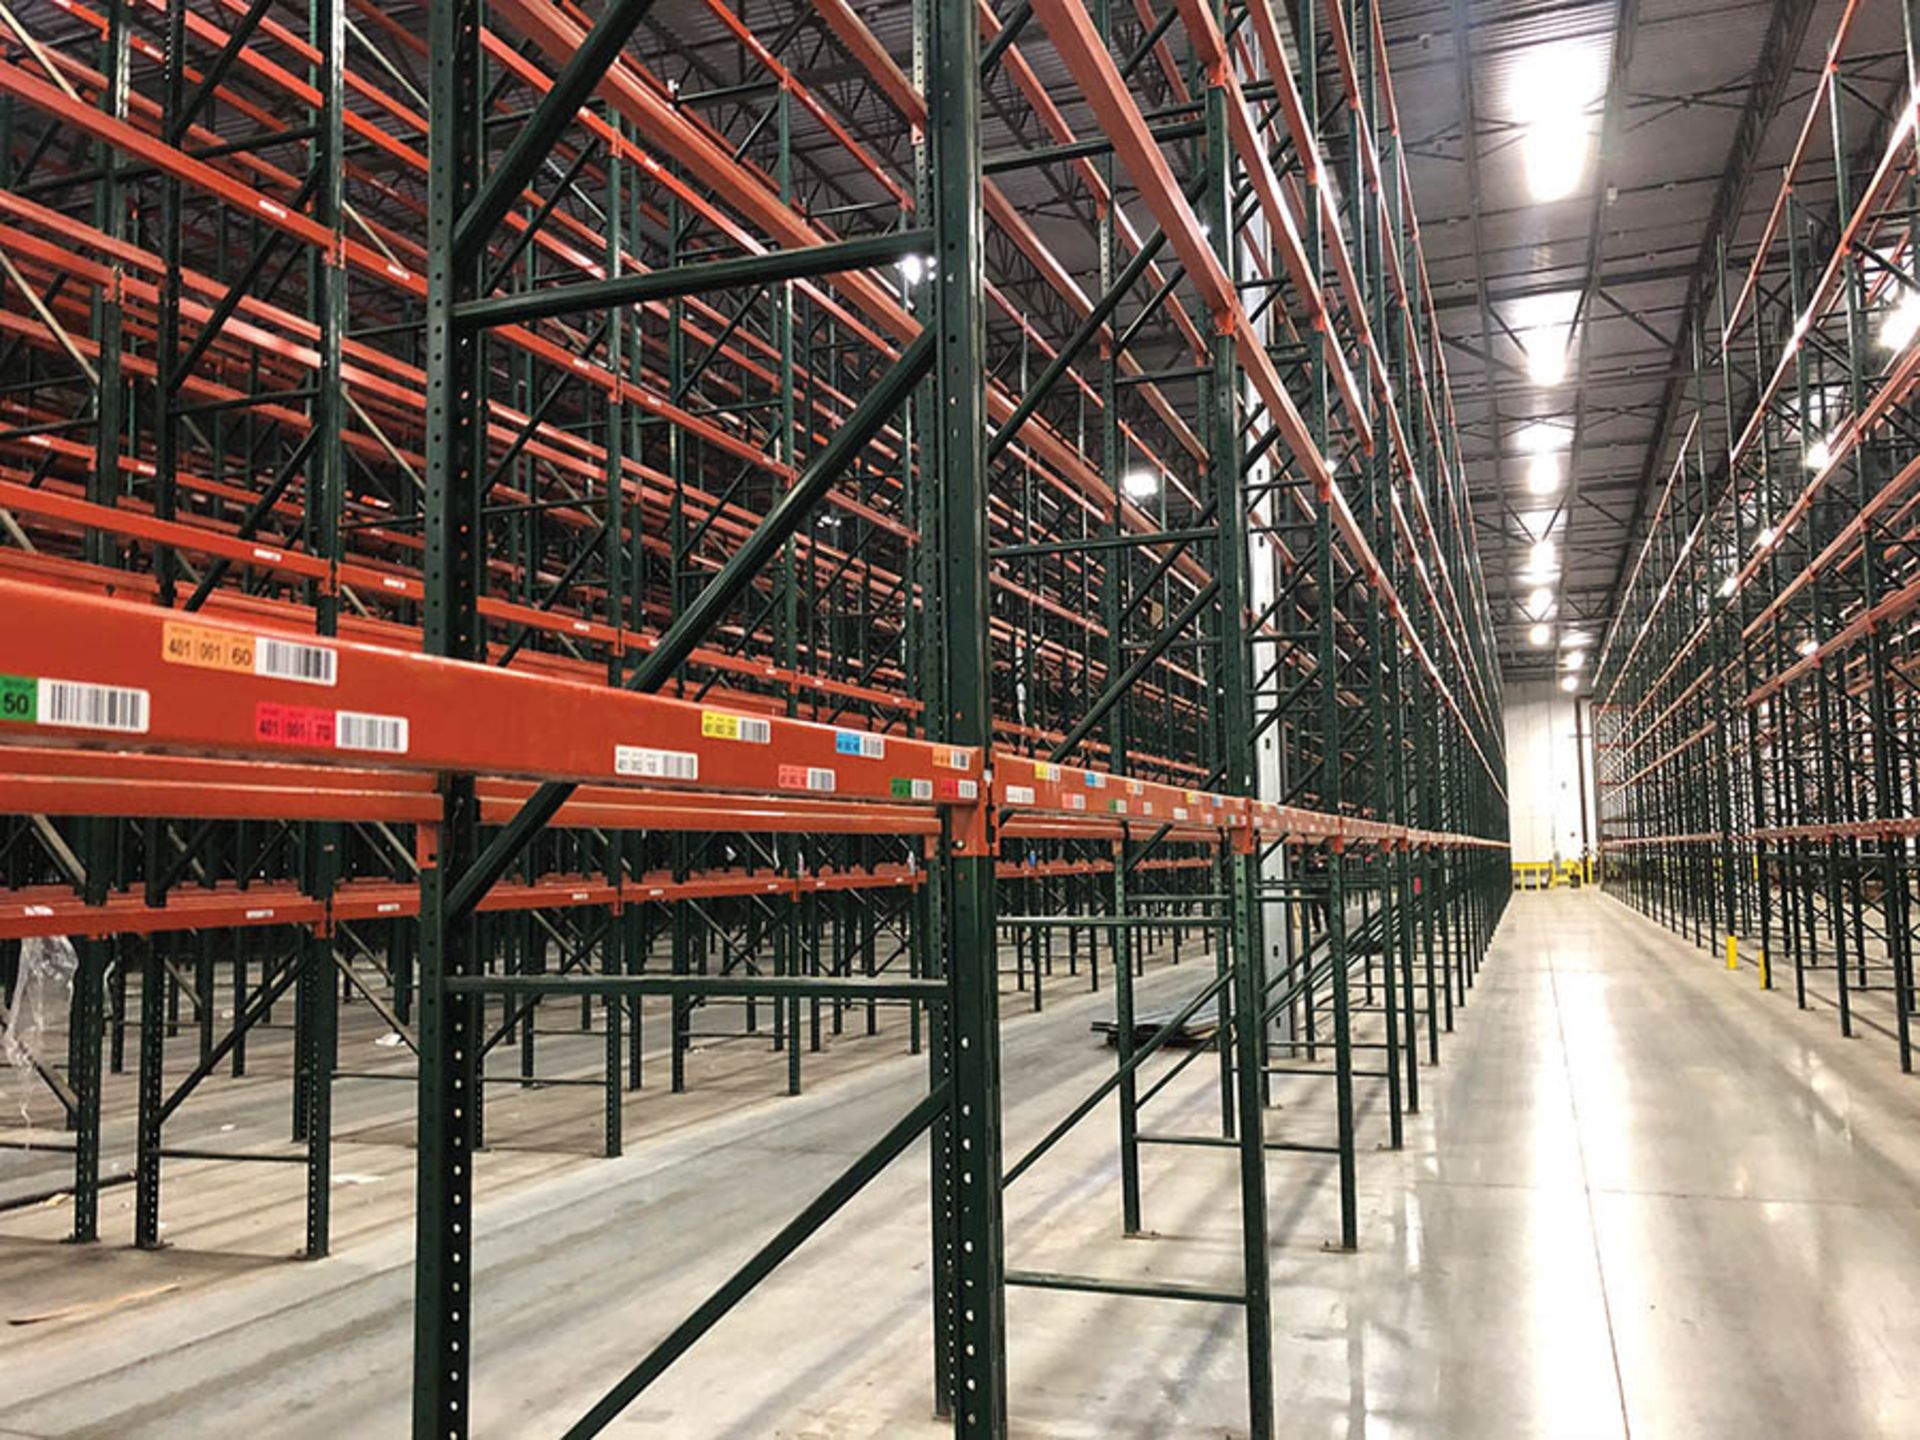 (27) BAYS/SECTIONS OF RIDG-U-RAK PALLET RACKING, CONSISTING OF (28) TOTAL UPRIGHTS- (2) UPRIGHTS ARE